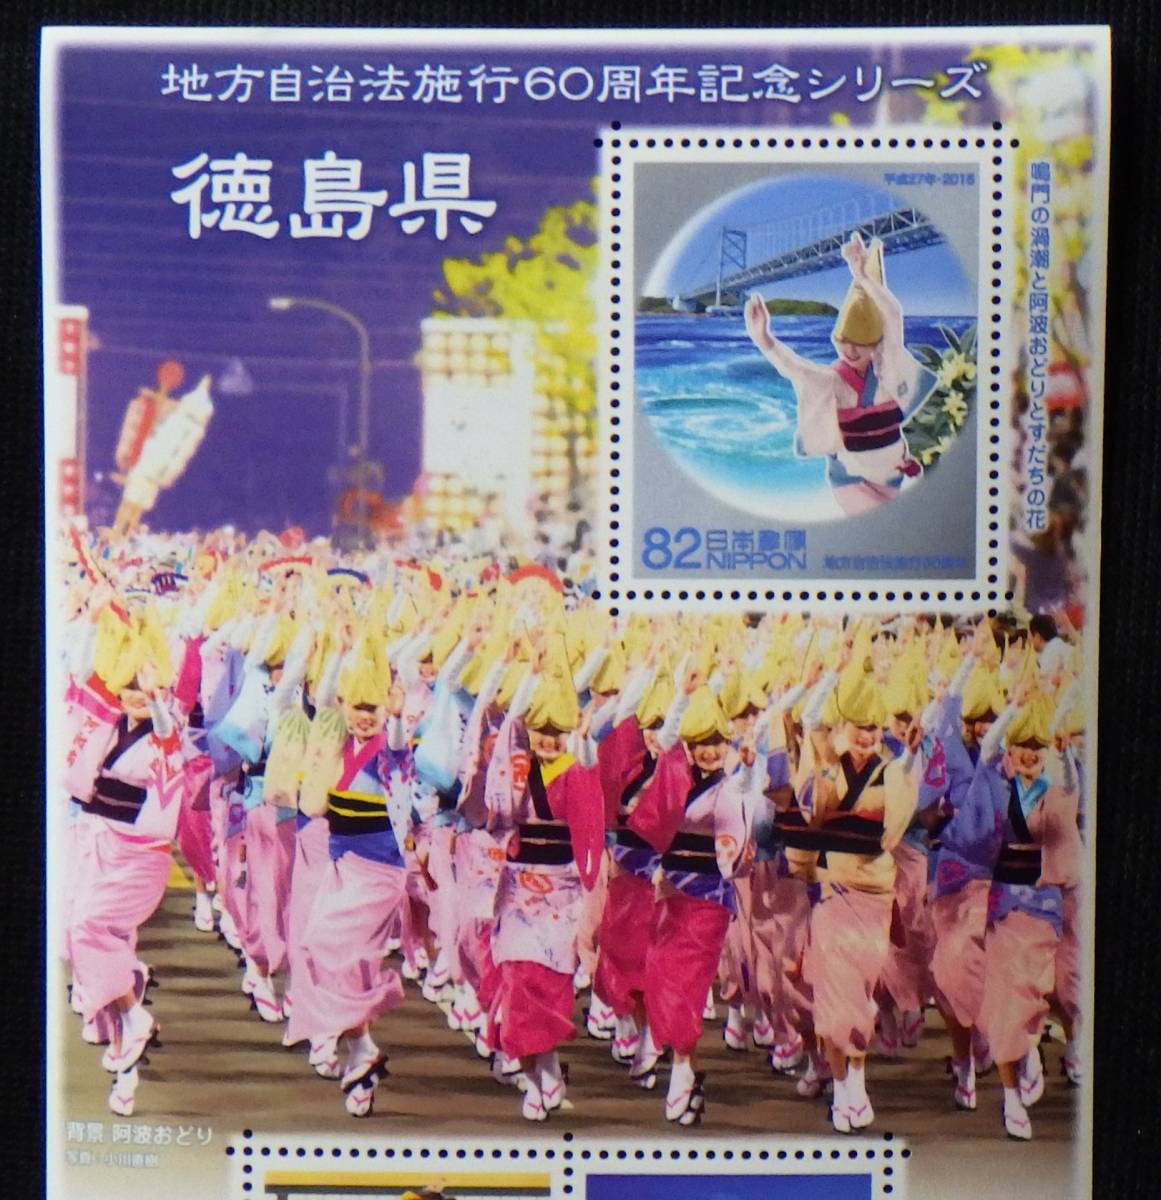  commemorative stamp local government law . line 60 anniversary commemoration series Tokushima prefecture . wave ...2015 year Heisei era 27 year 82 jpy 5 sheets unused special stamp rank A